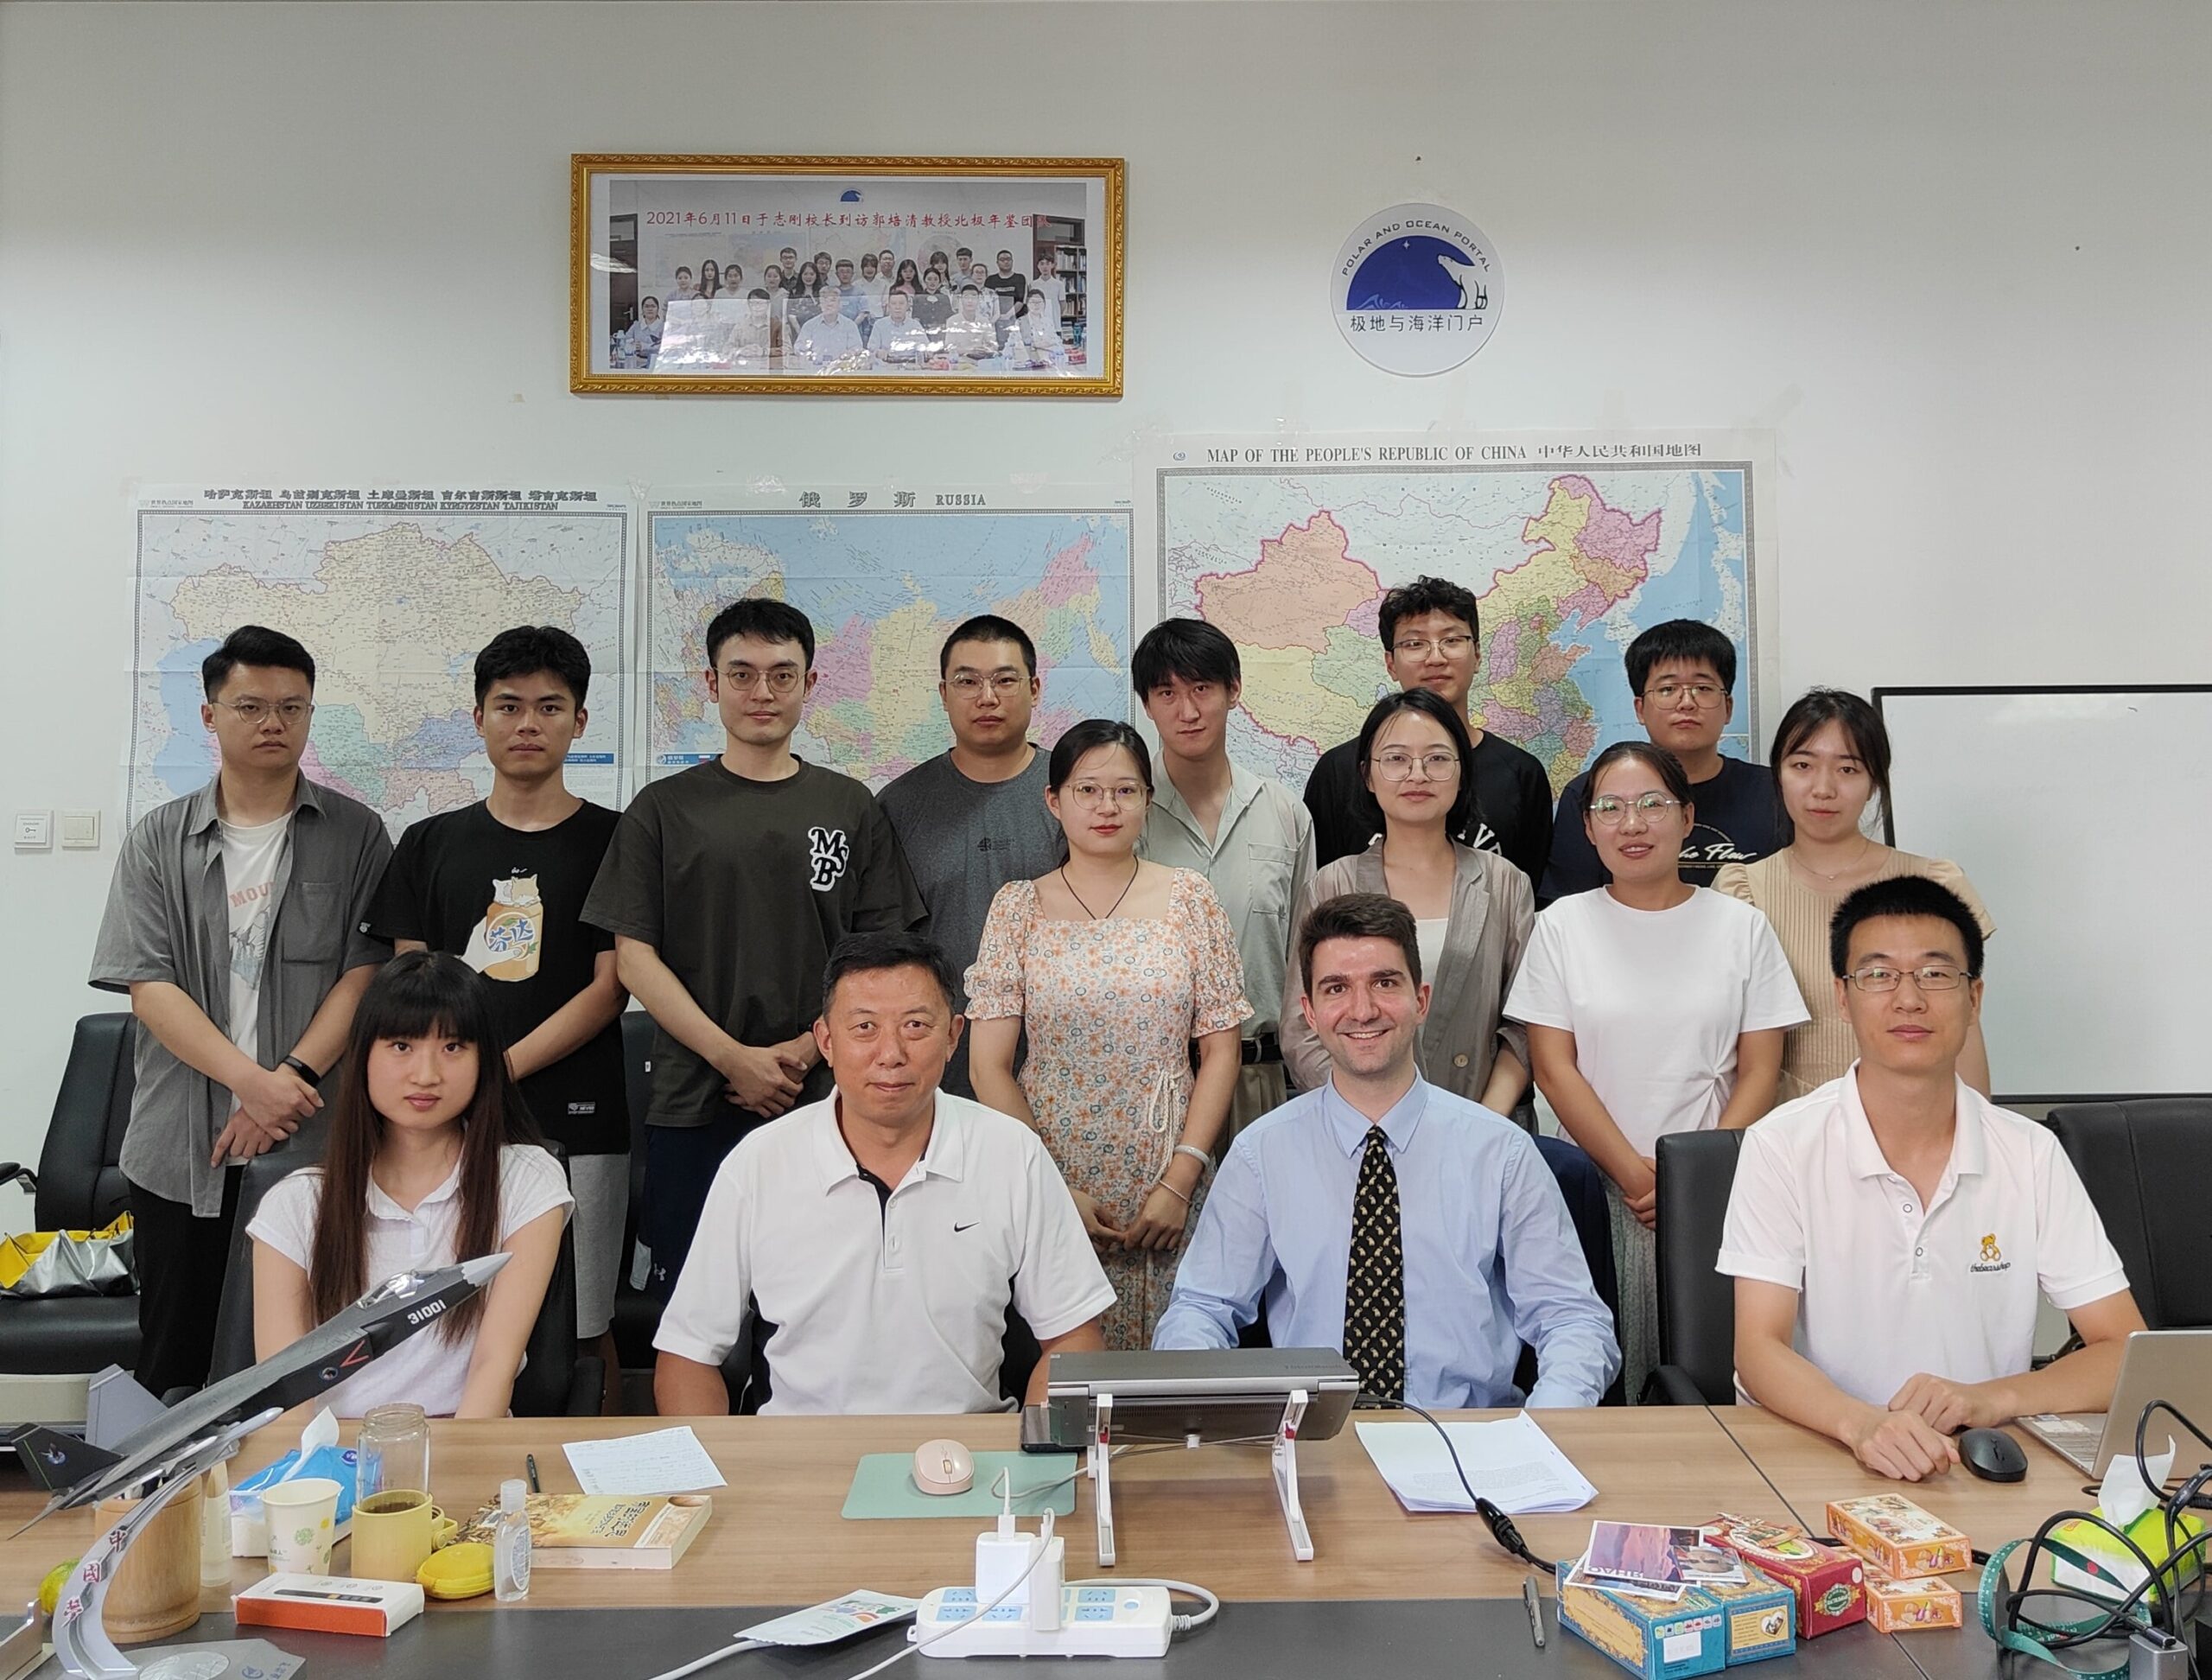 16 students and professors standing in front of maps, sitting at a table, in a classroom in China